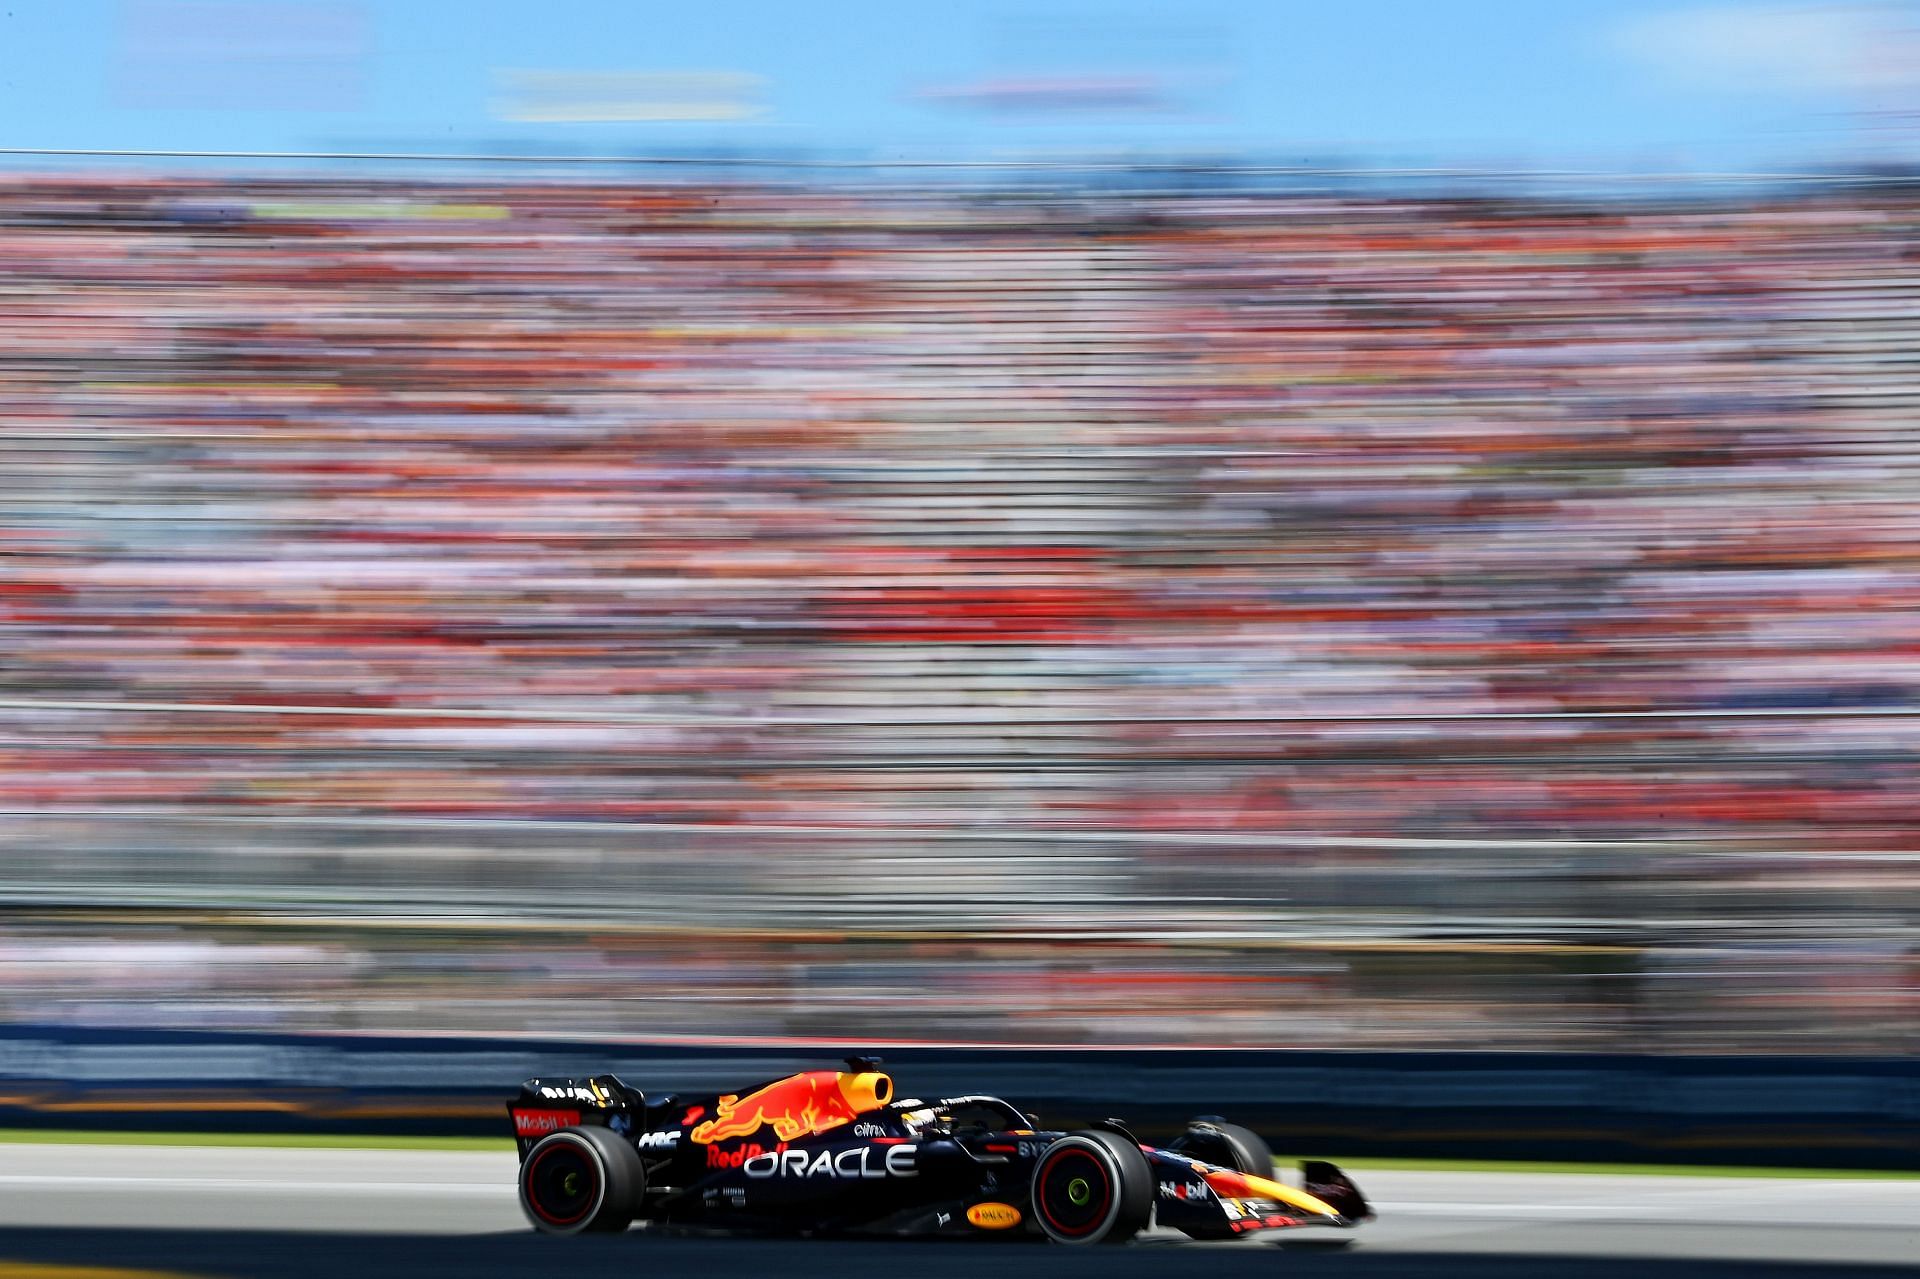 Red Bull driver Max Verstappen en route to his win at the 2022 F1 Canadian GP. (Photo by Dan Mullan/Getty Images)